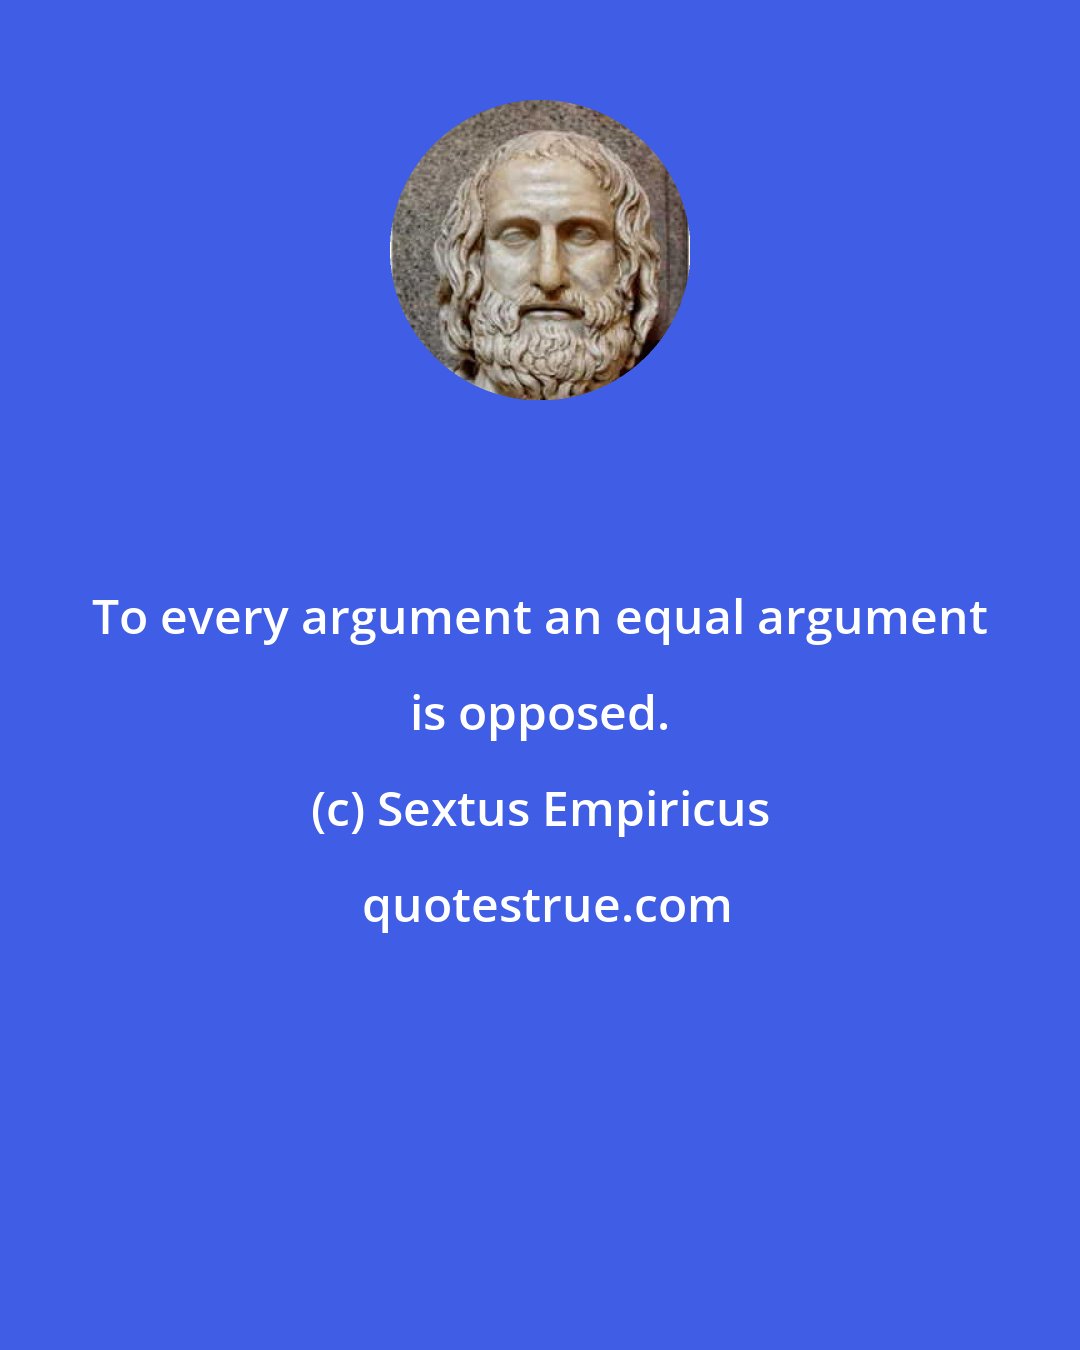 Sextus Empiricus: To every argument an equal argument is opposed.